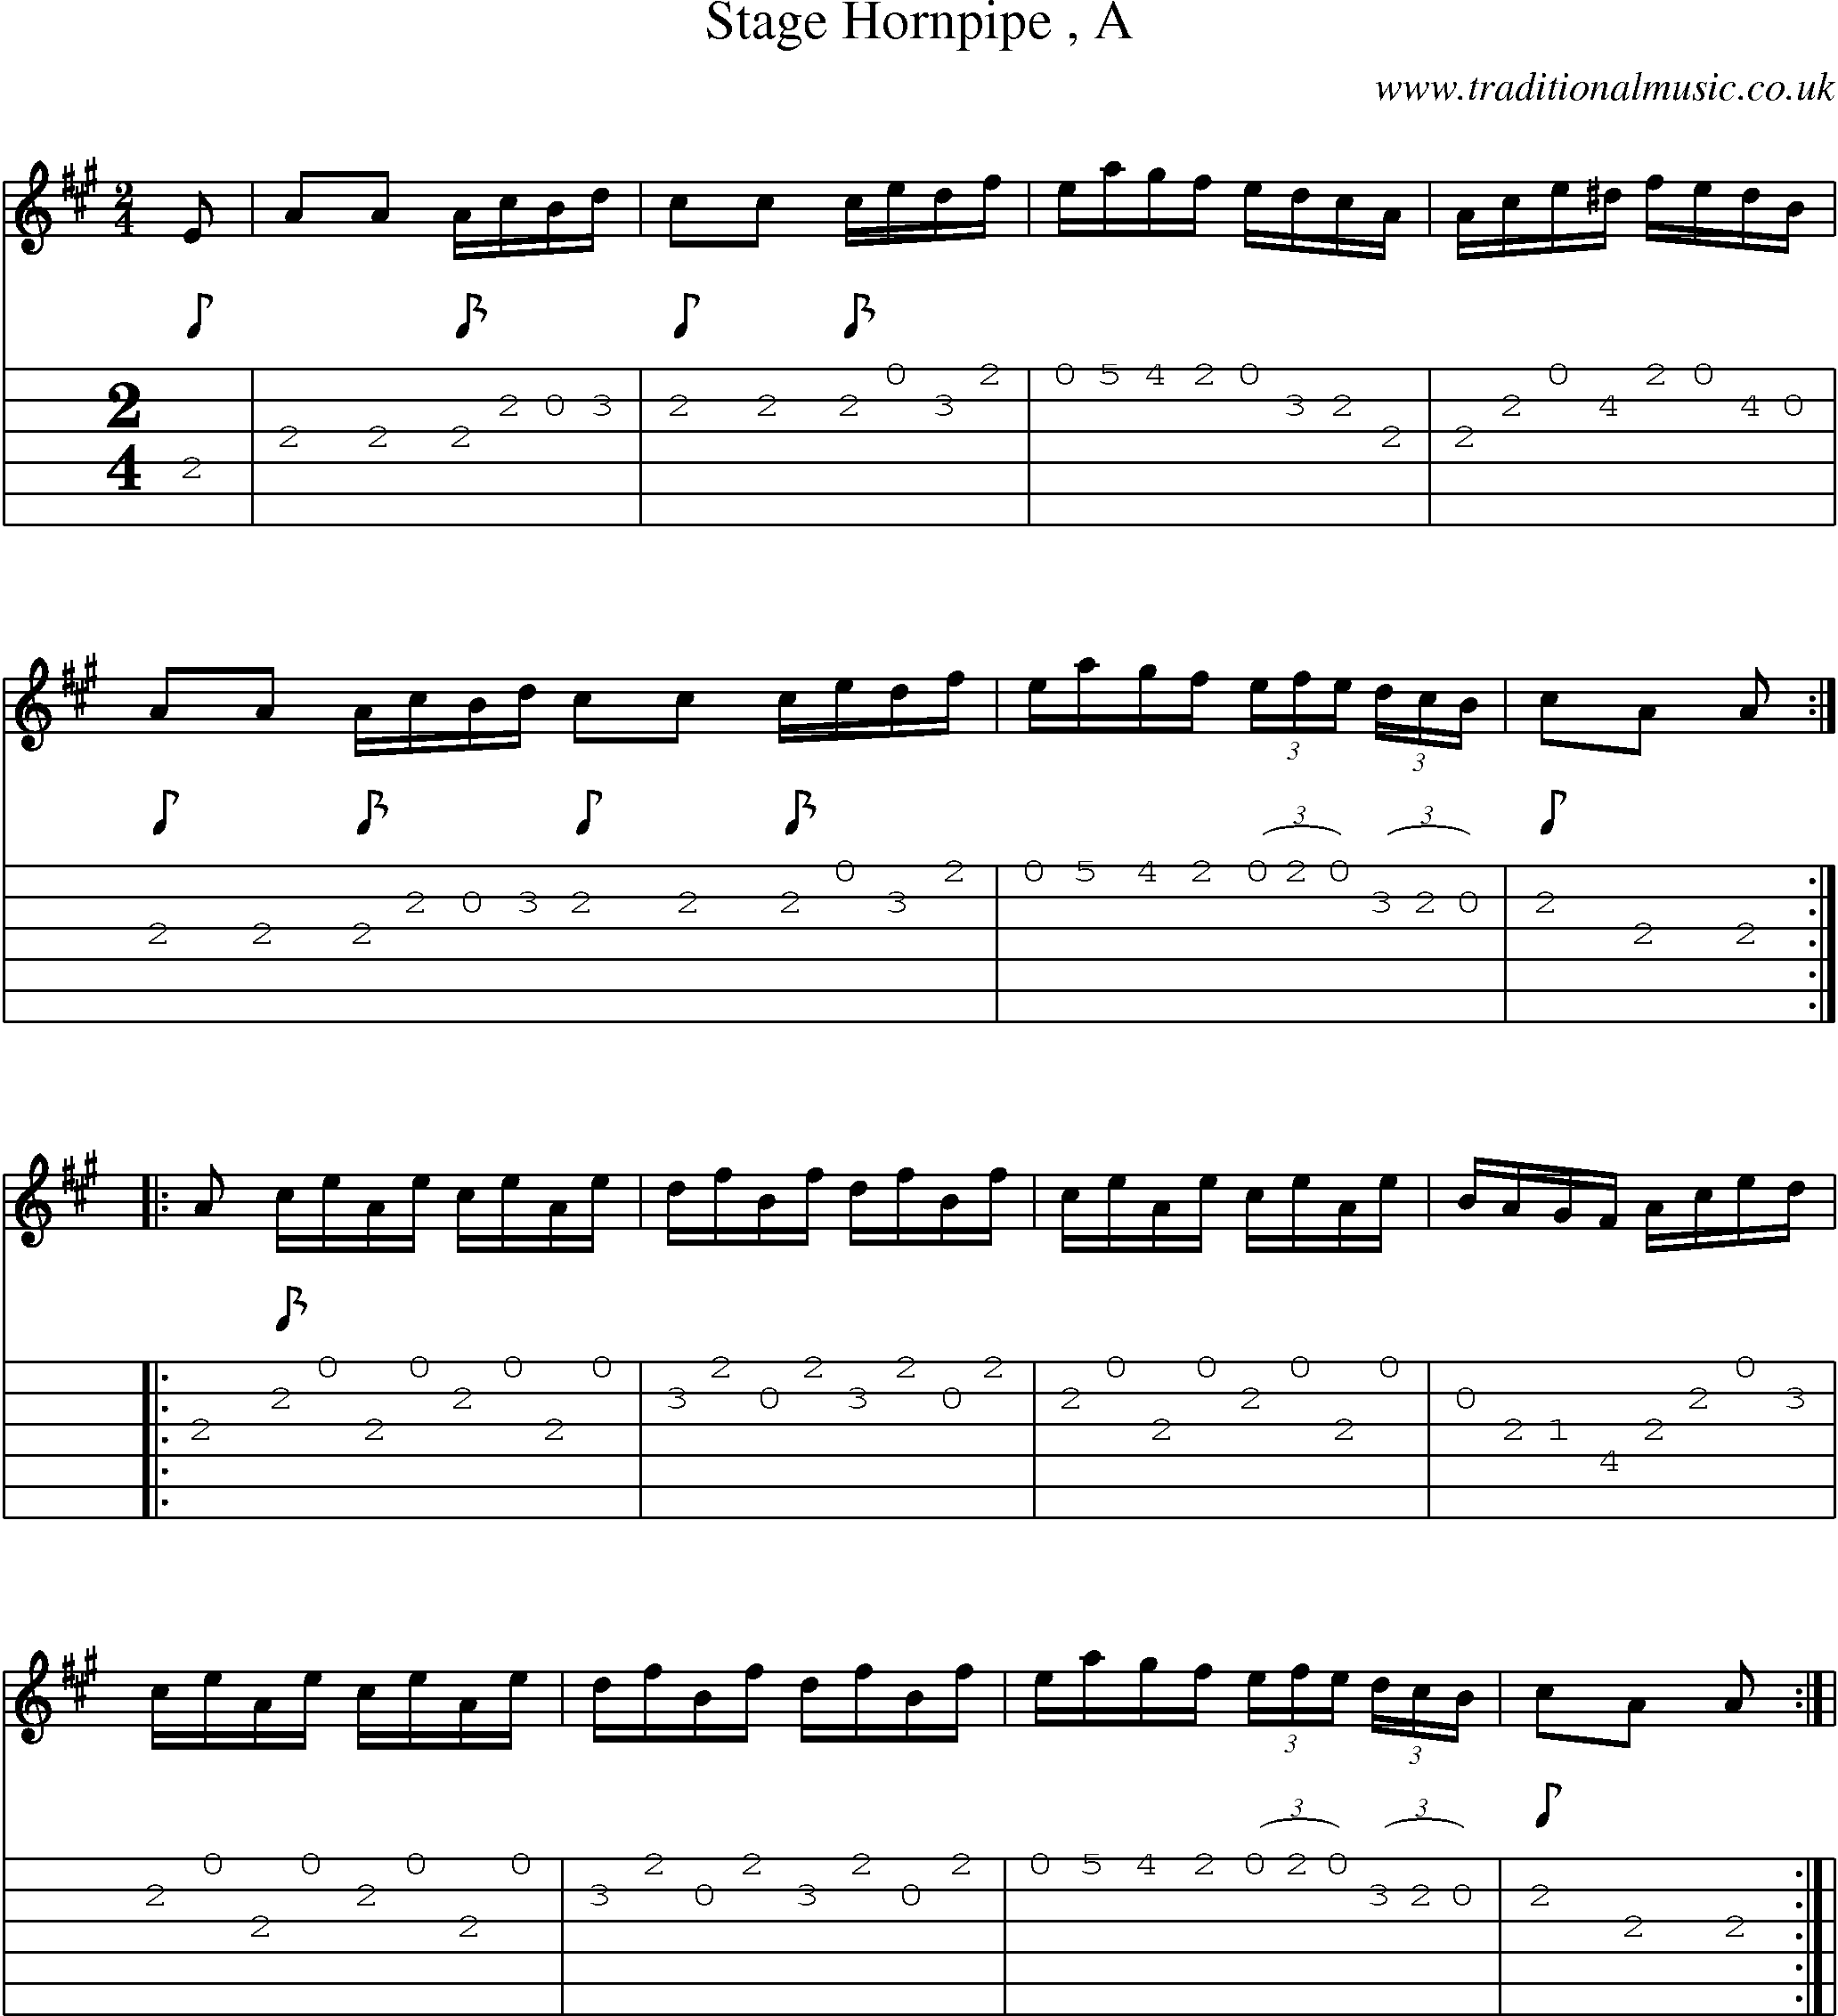 Music Score and Guitar Tabs for Stage Hornpipe A